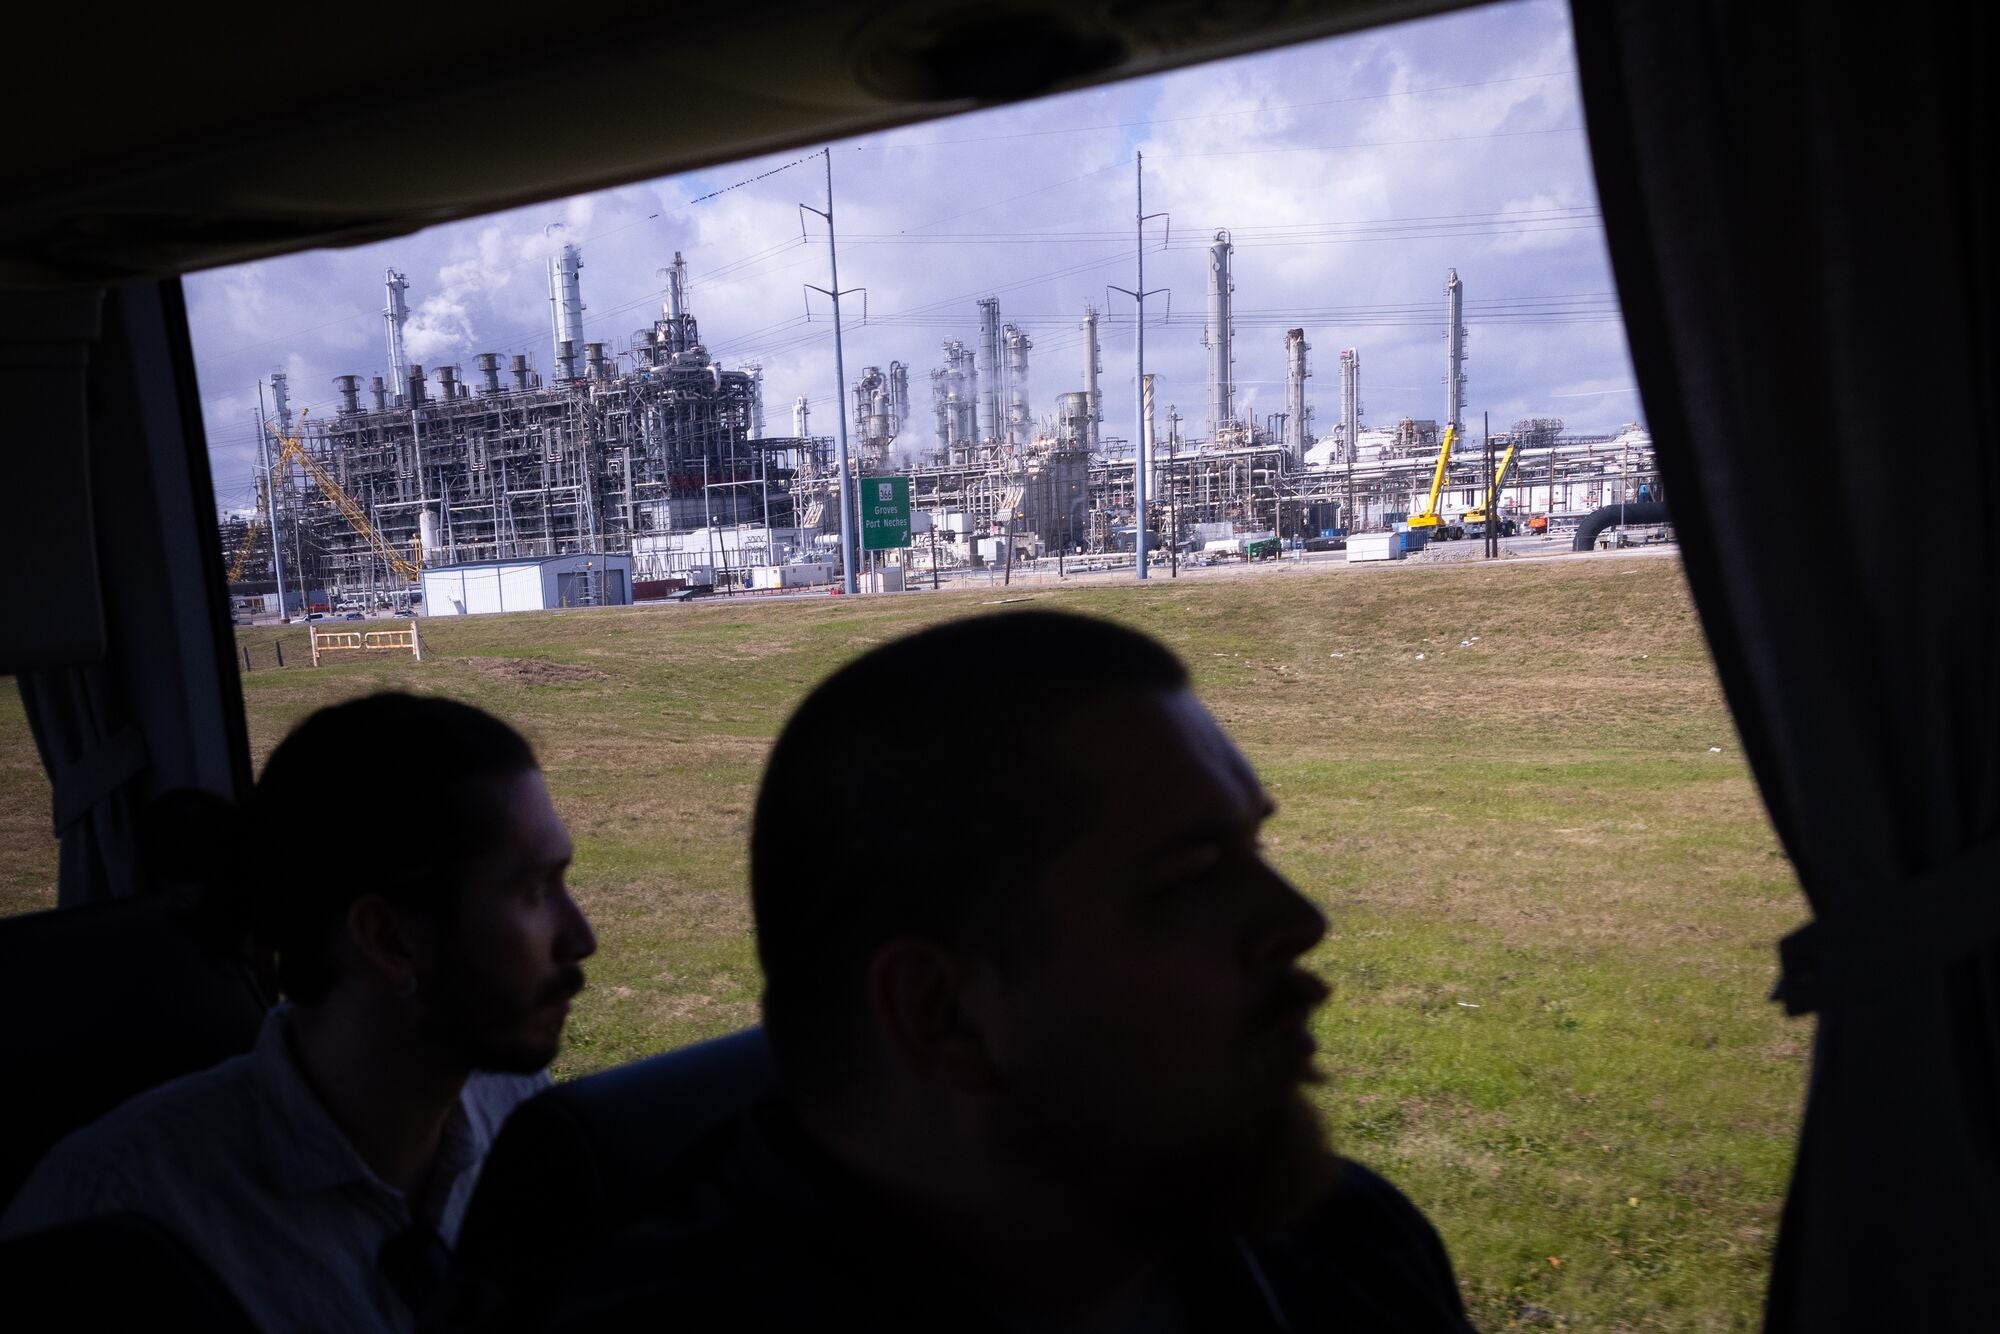 A "toxic tour" of polluting facilities in Port Arthur, TX, led by John Beard, Jr., of the Port Arthur Community Action Network.